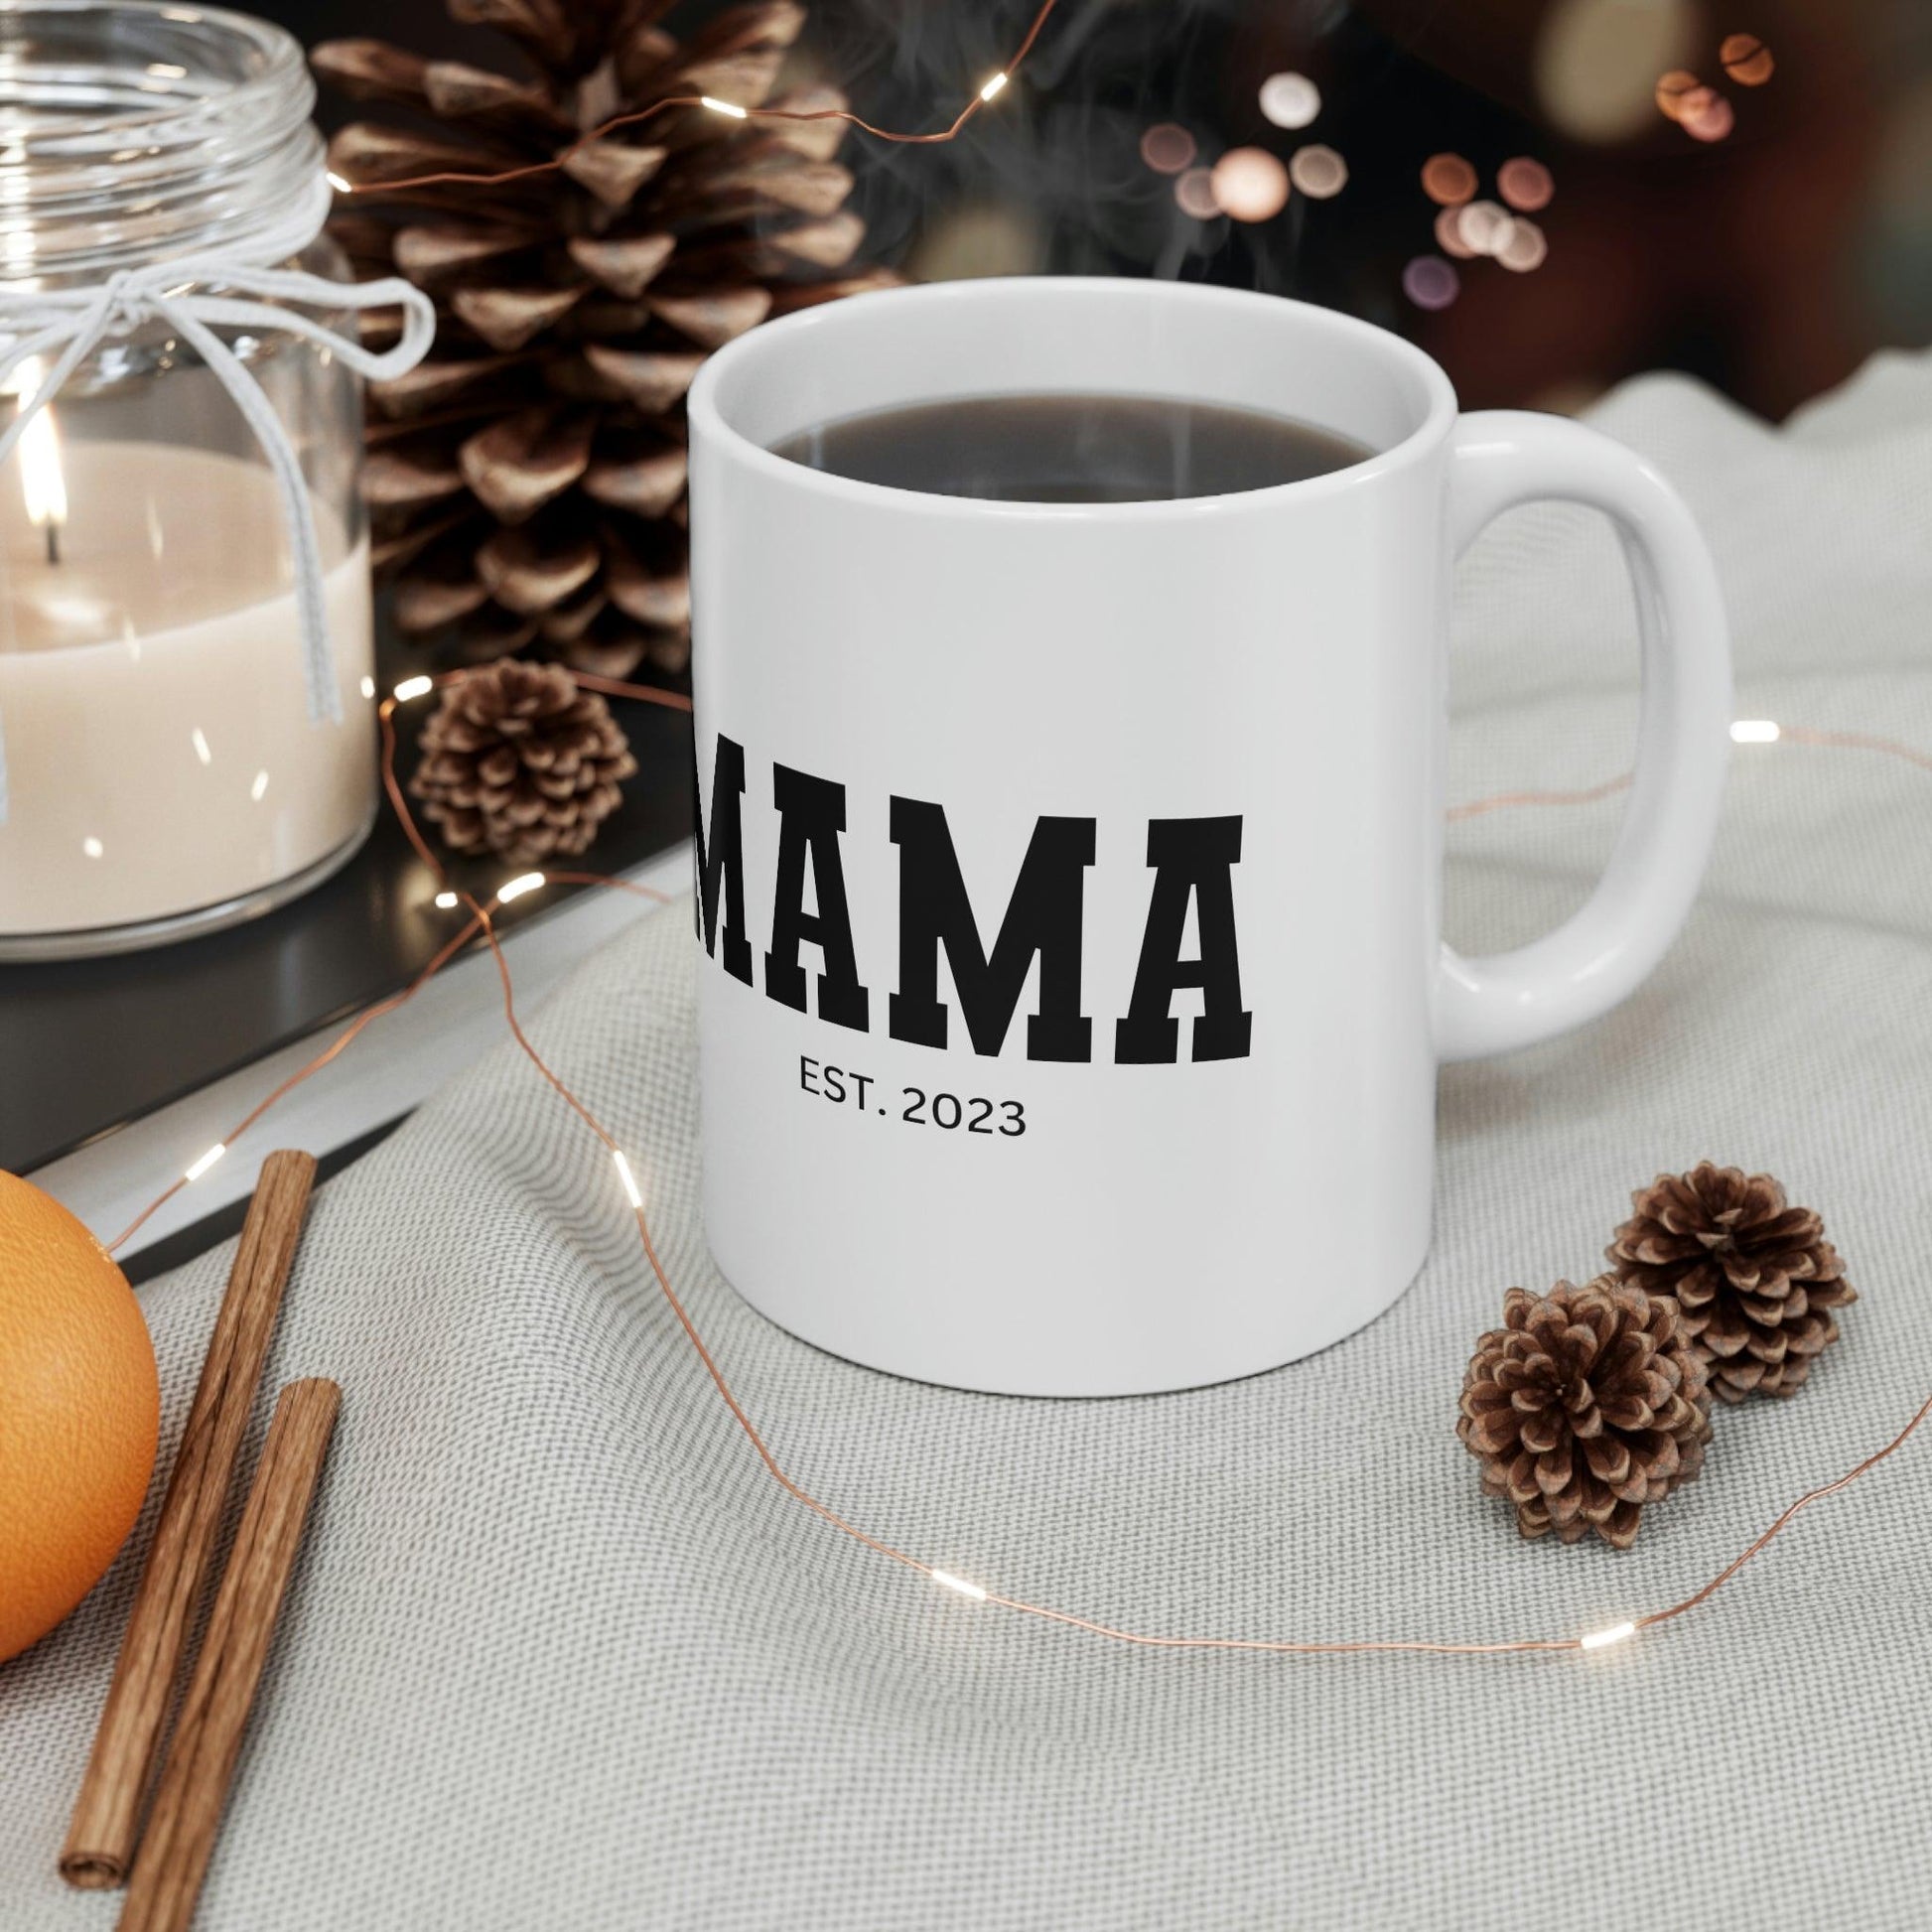 Best Mama Ever Mug, gift for mom on mothers day, Birthday gift for mom, gift for her, coffee mug for her, hot cocoa mug, gift for coffee lover - Giftsmojo